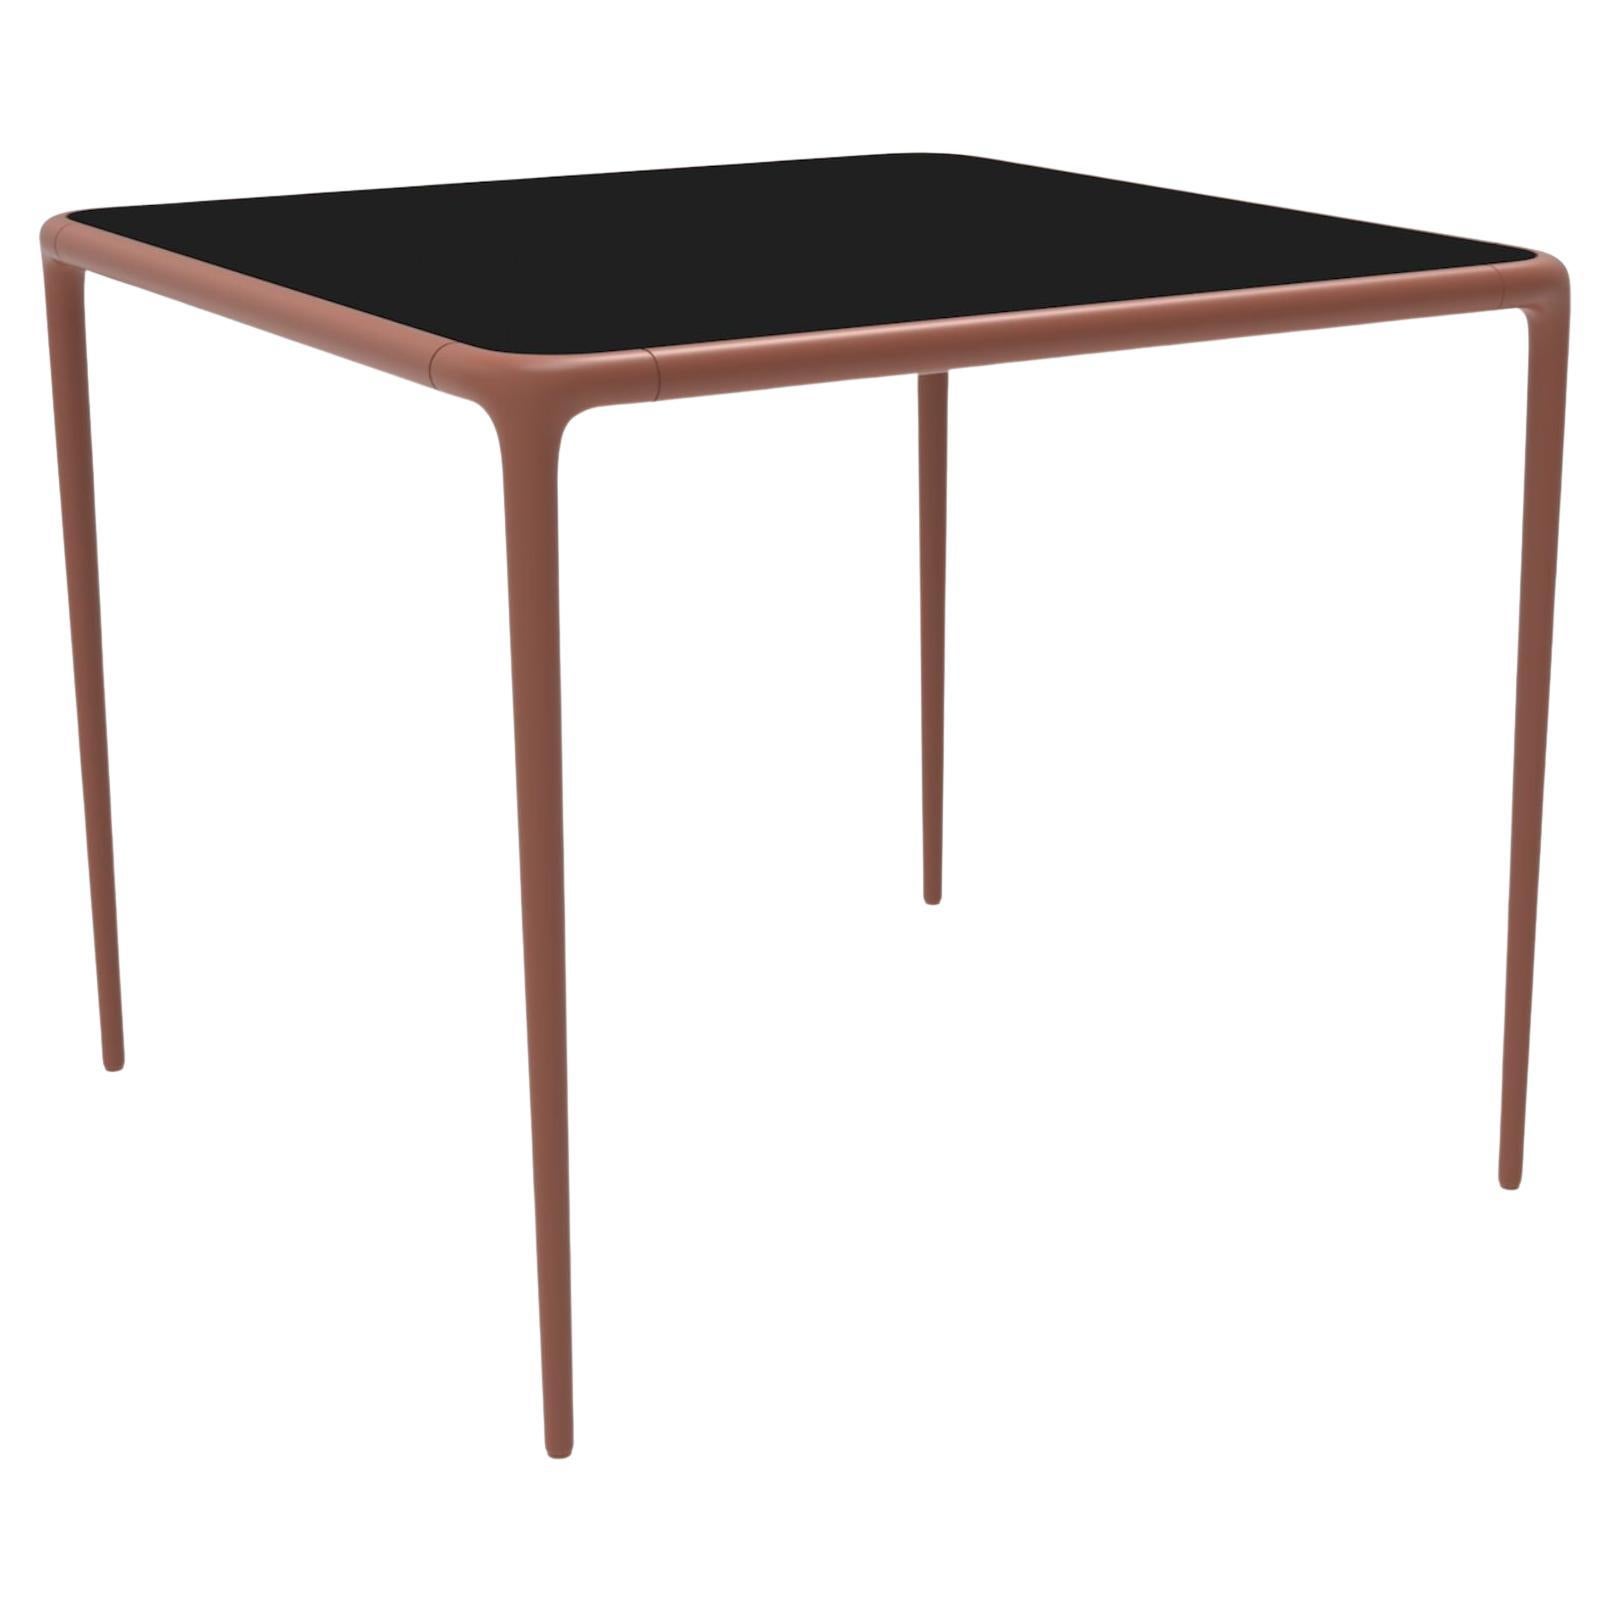 Xaloc Salmon Glass Top Table 90 by Mowee For Sale